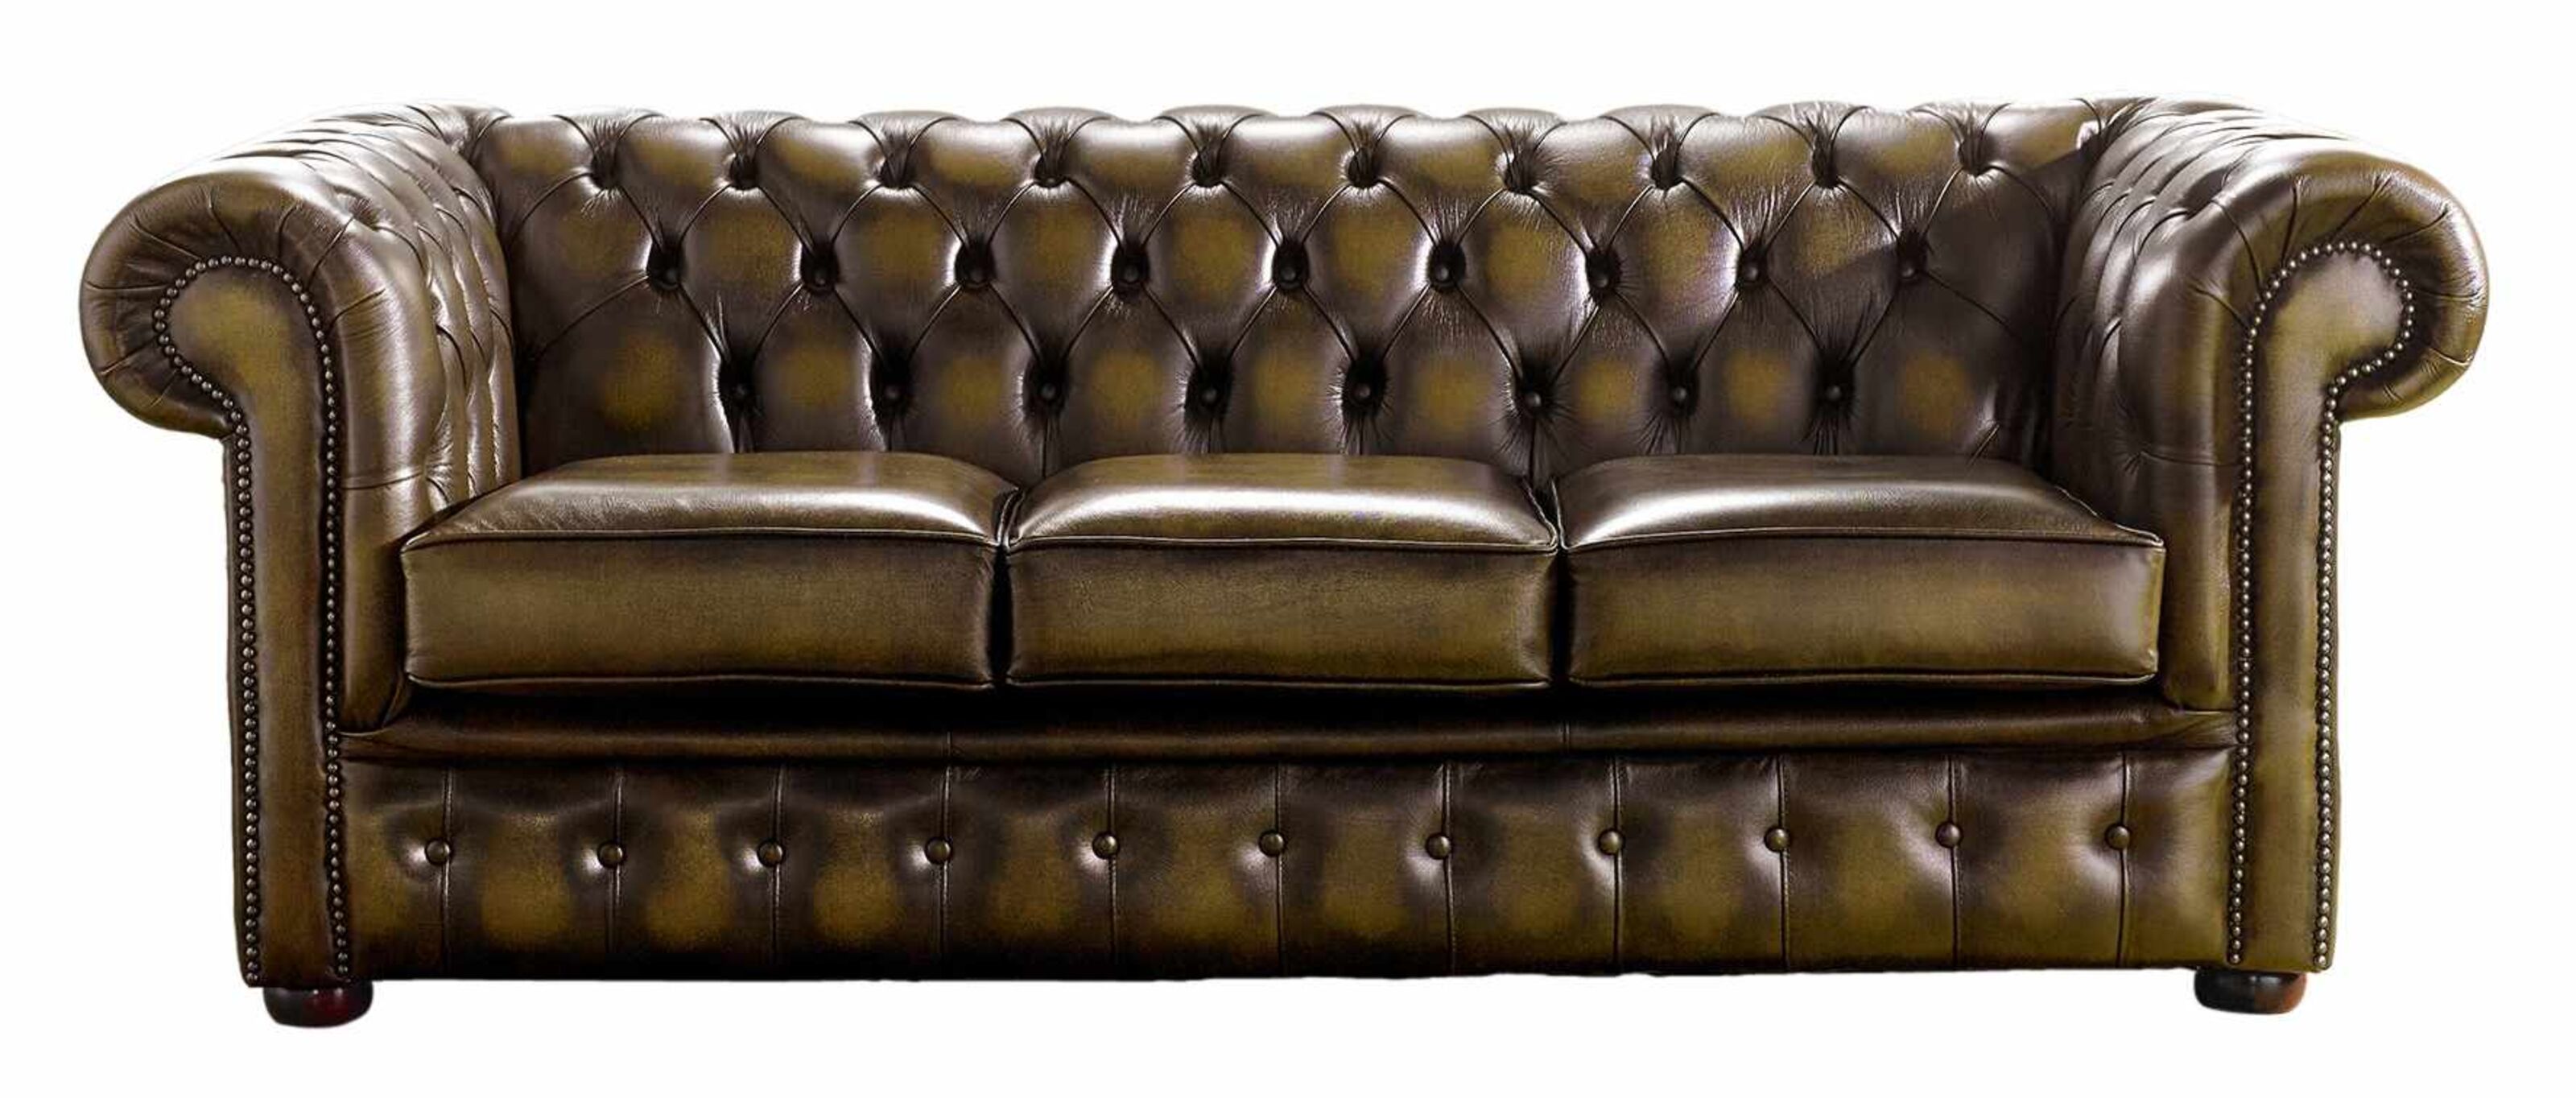 Unveiling Origins The Birthplace and Craftsmanship of Chesterfield Sofas  %Post Title